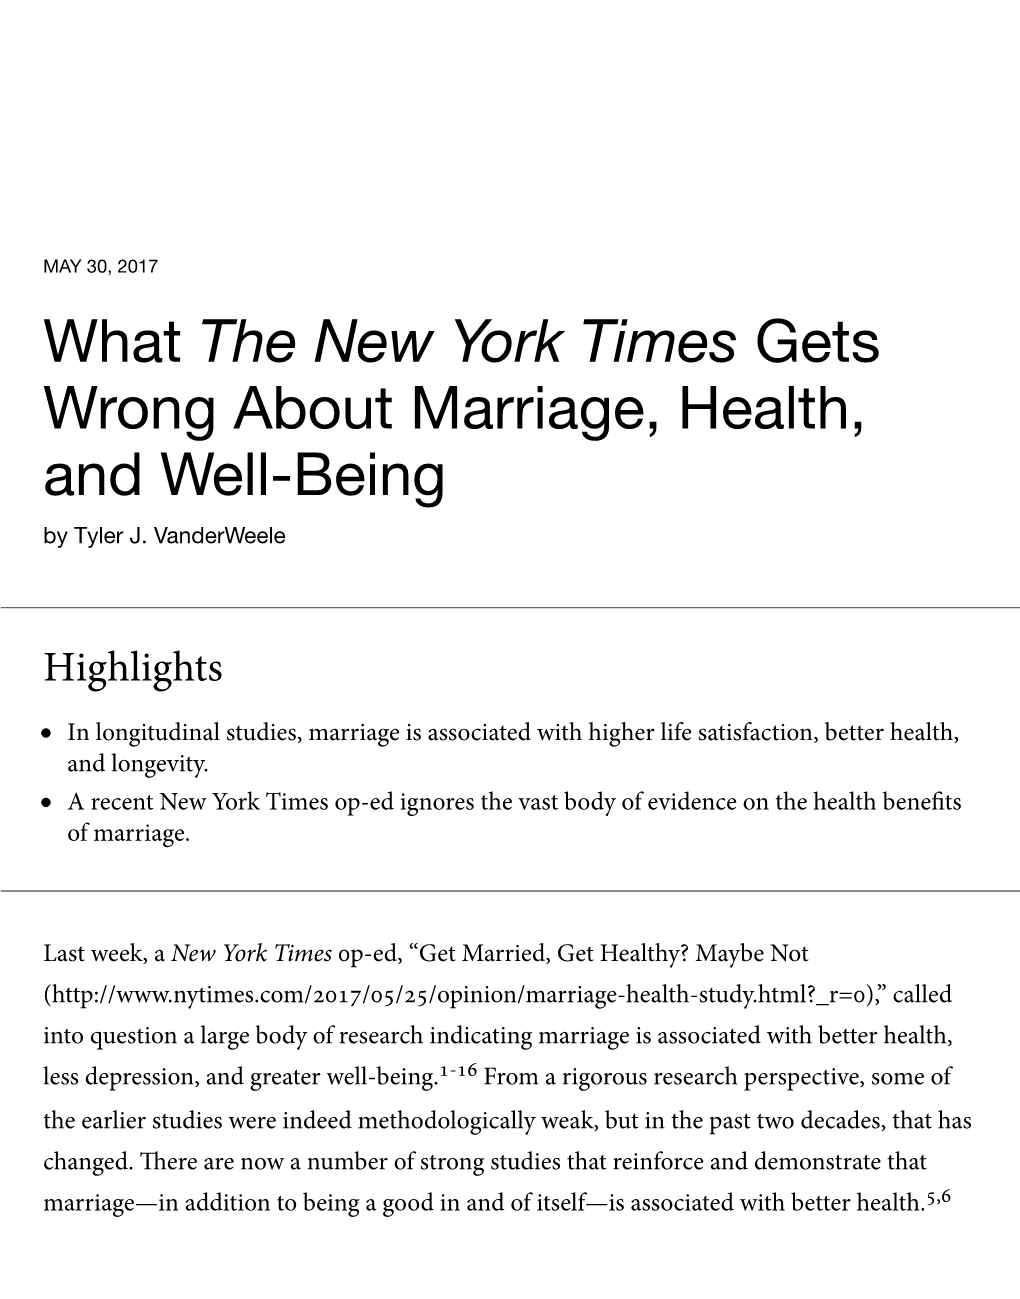 What the New York Times Gets Wrong About Marriage, Health, and Well-Being by Tyler J